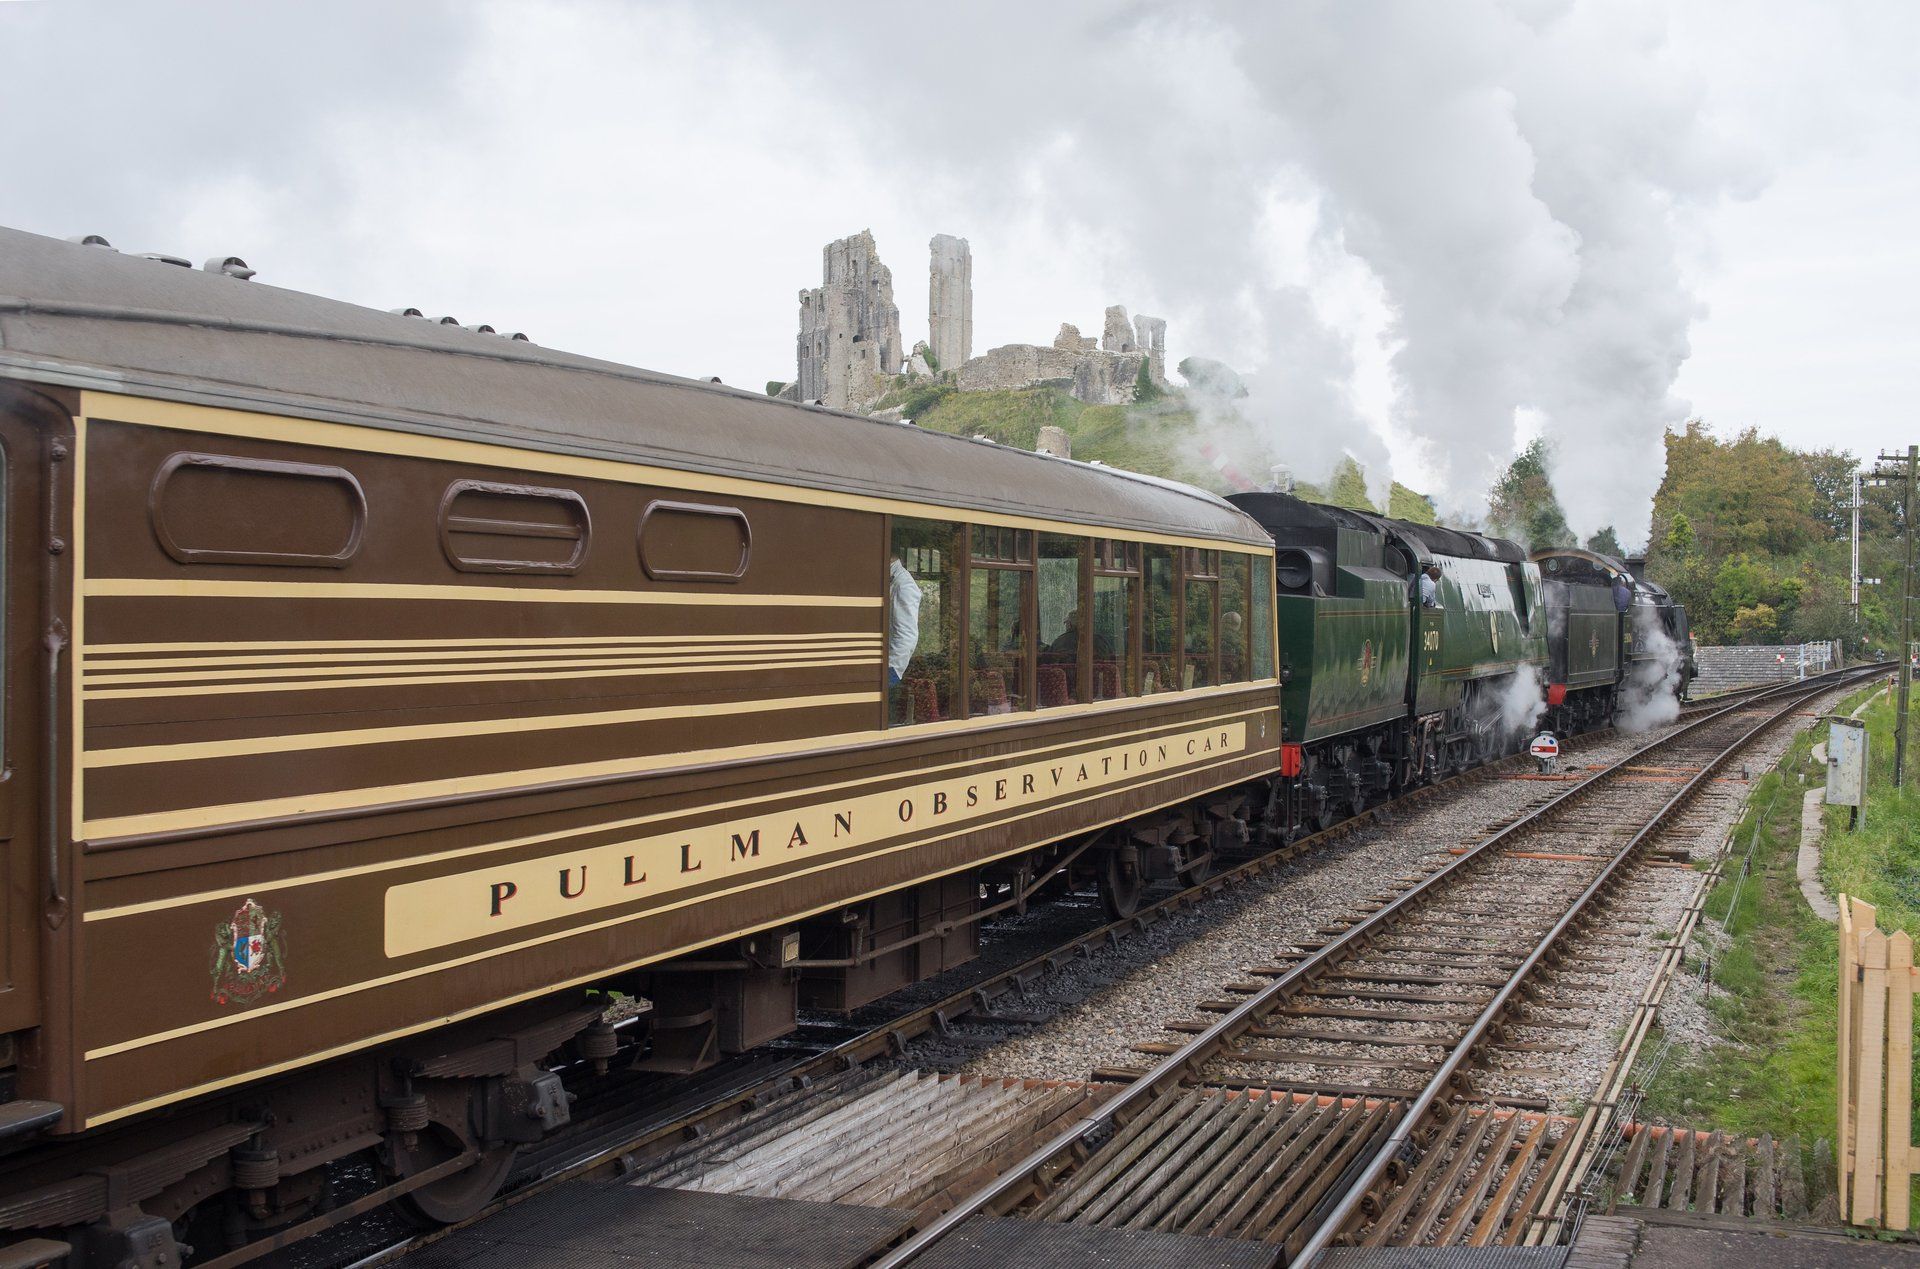 17th September 2015, Swanage Railway, Photo: Gerry Young